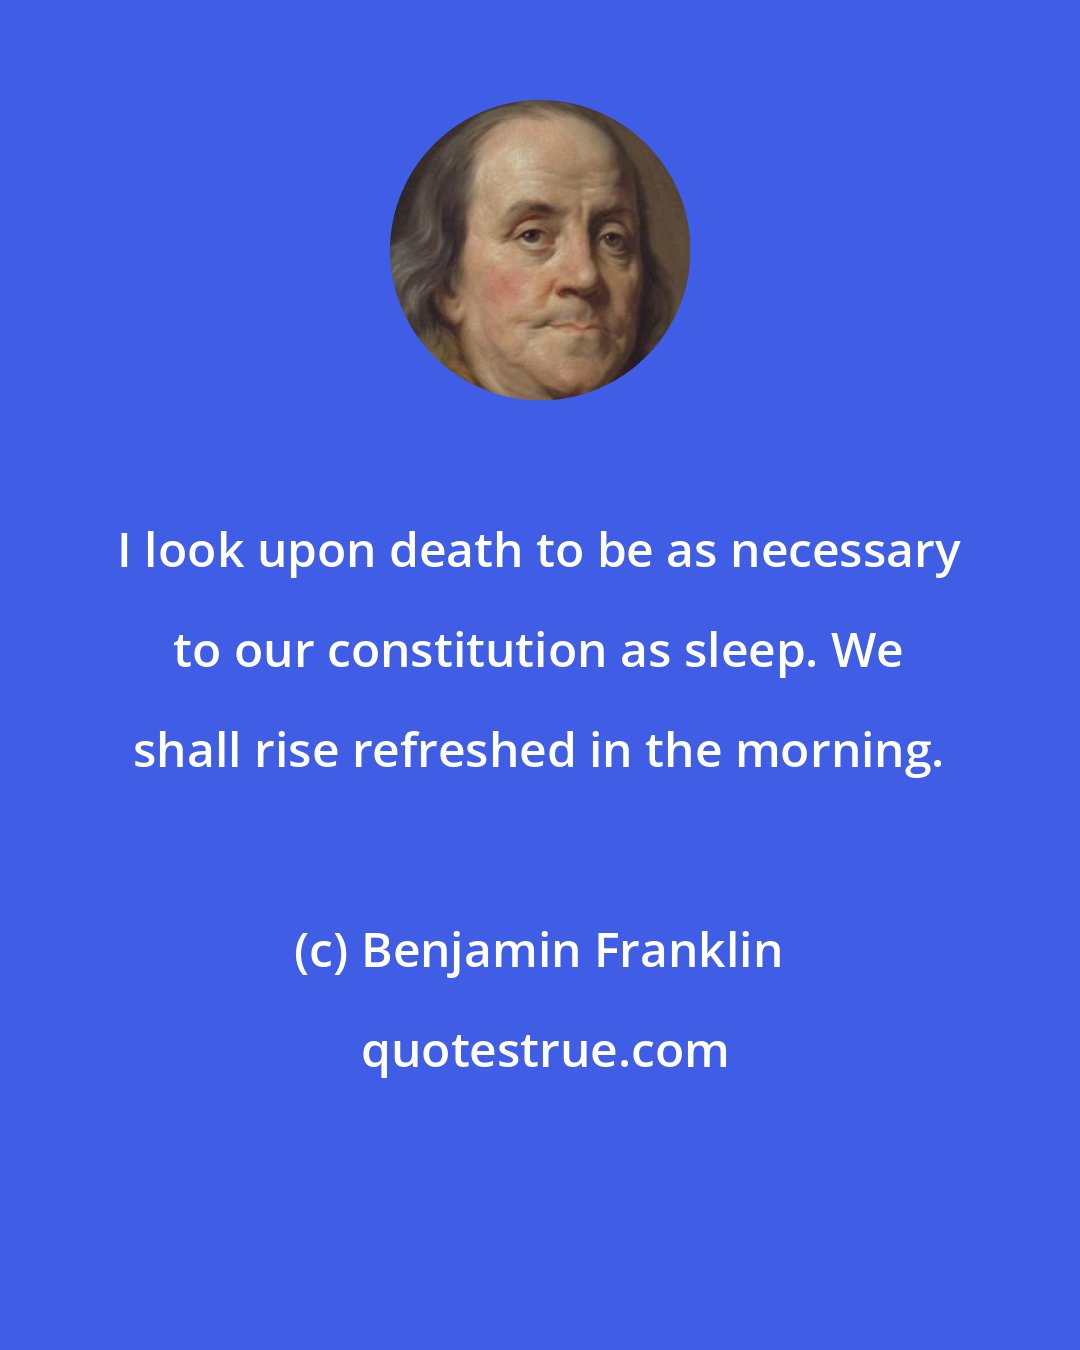 Benjamin Franklin: I look upon death to be as necessary to our constitution as sleep. We shall rise refreshed in the morning.